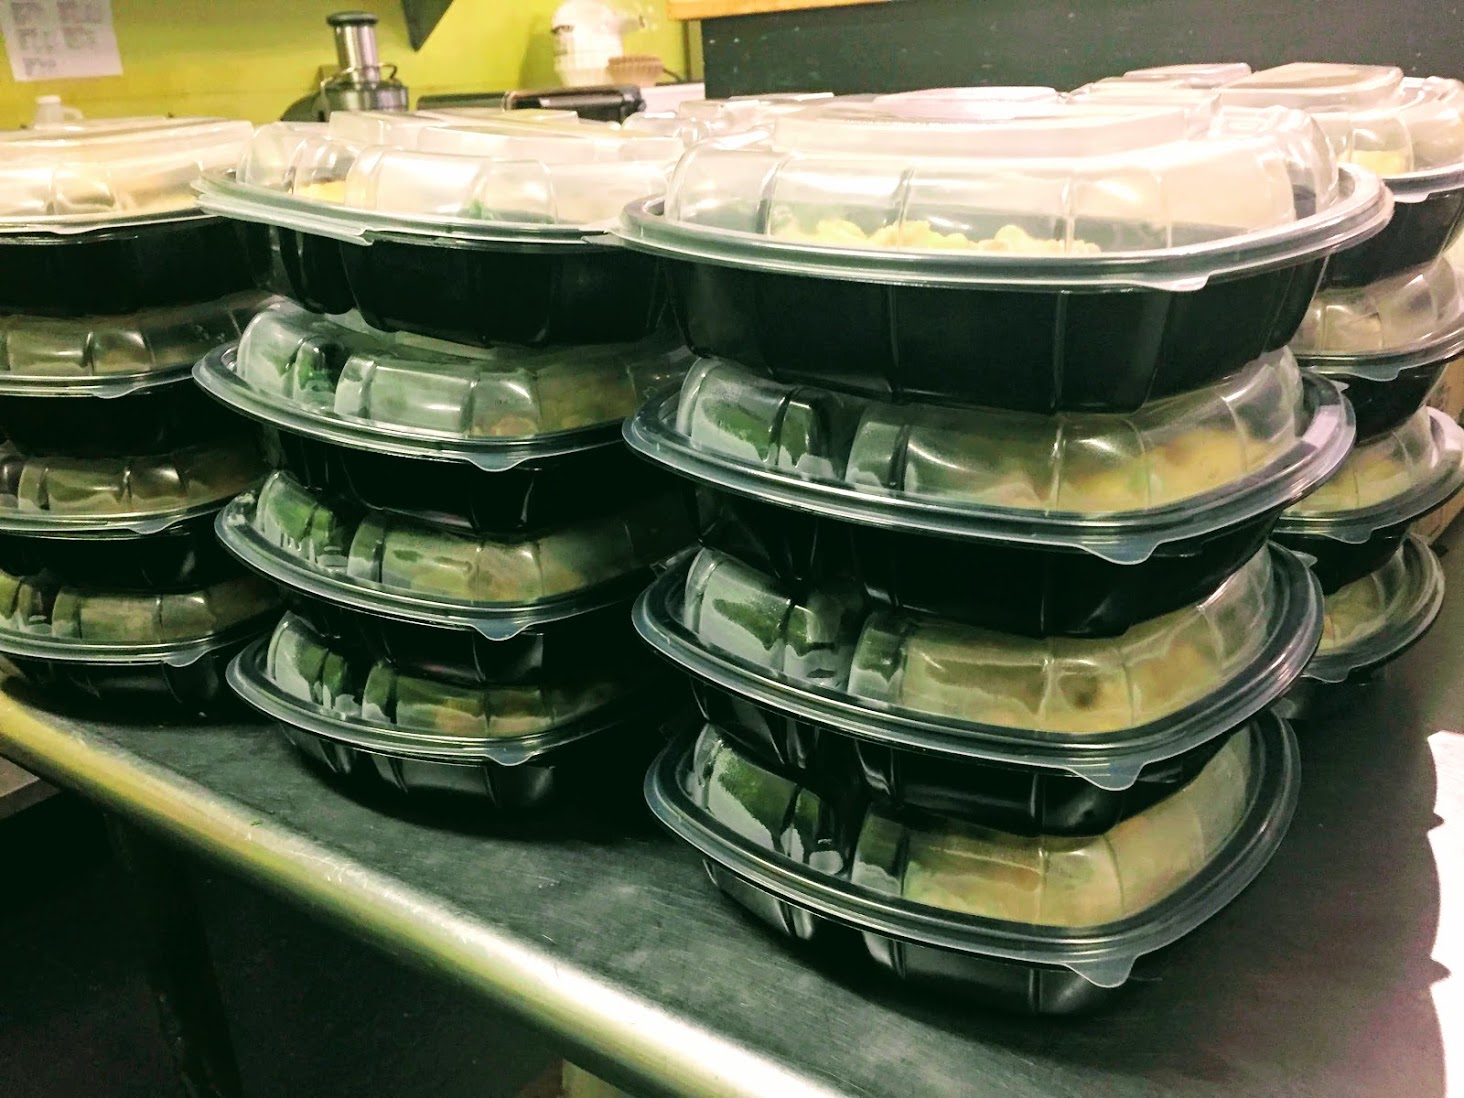 GMFTS Delivering Free Meals to Migrant Farm Workers in the NEK through Vermont Everyone Eats